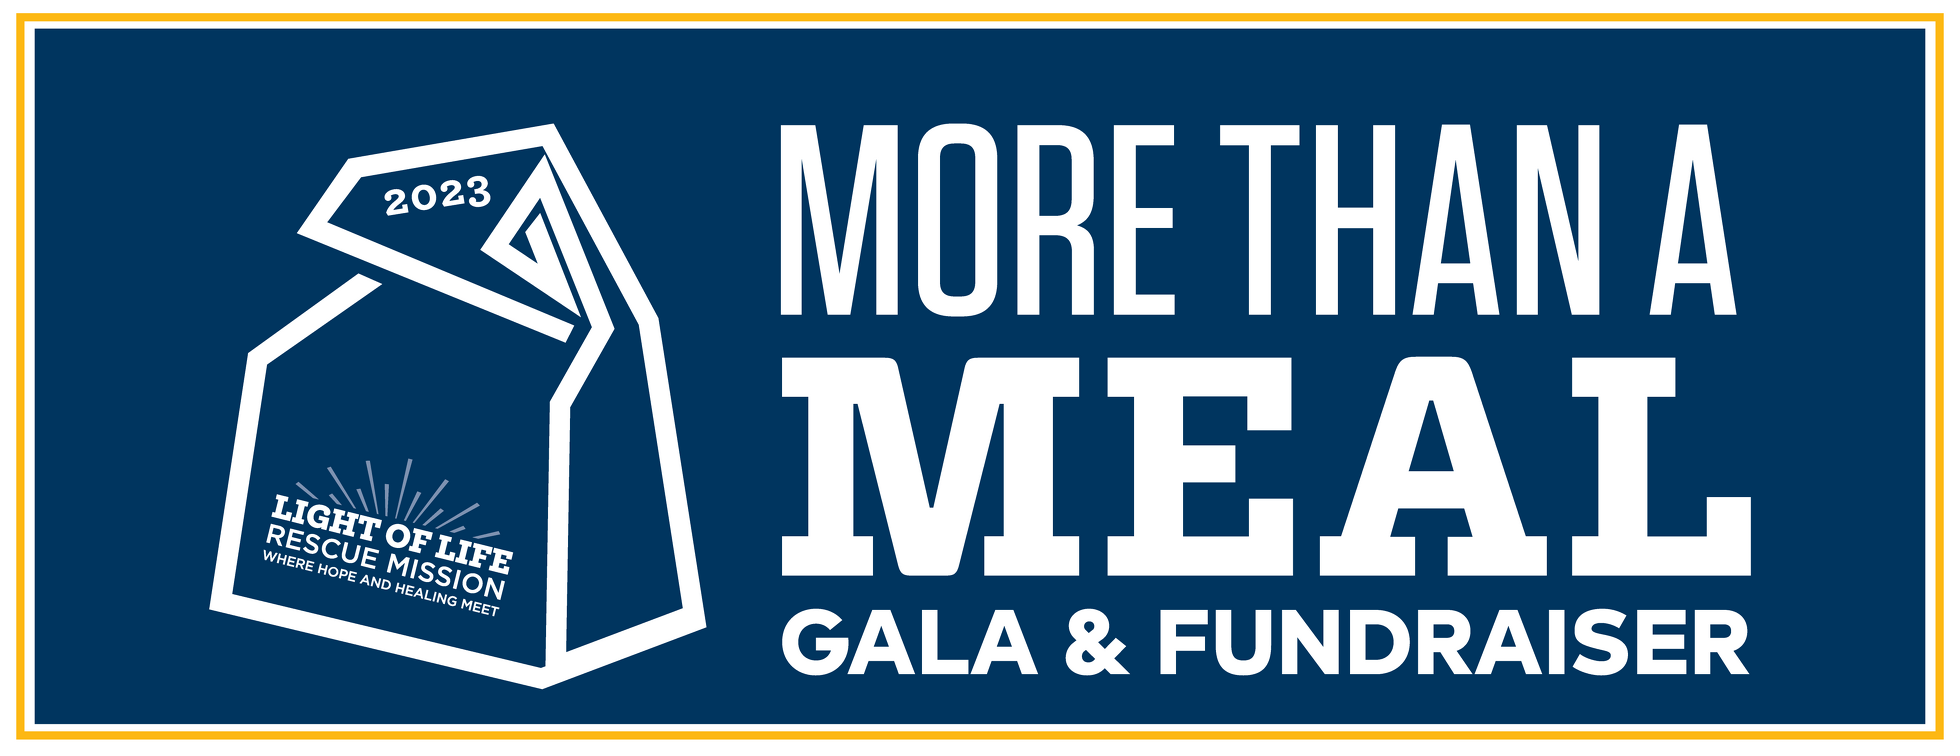 More Than a Meal Gala